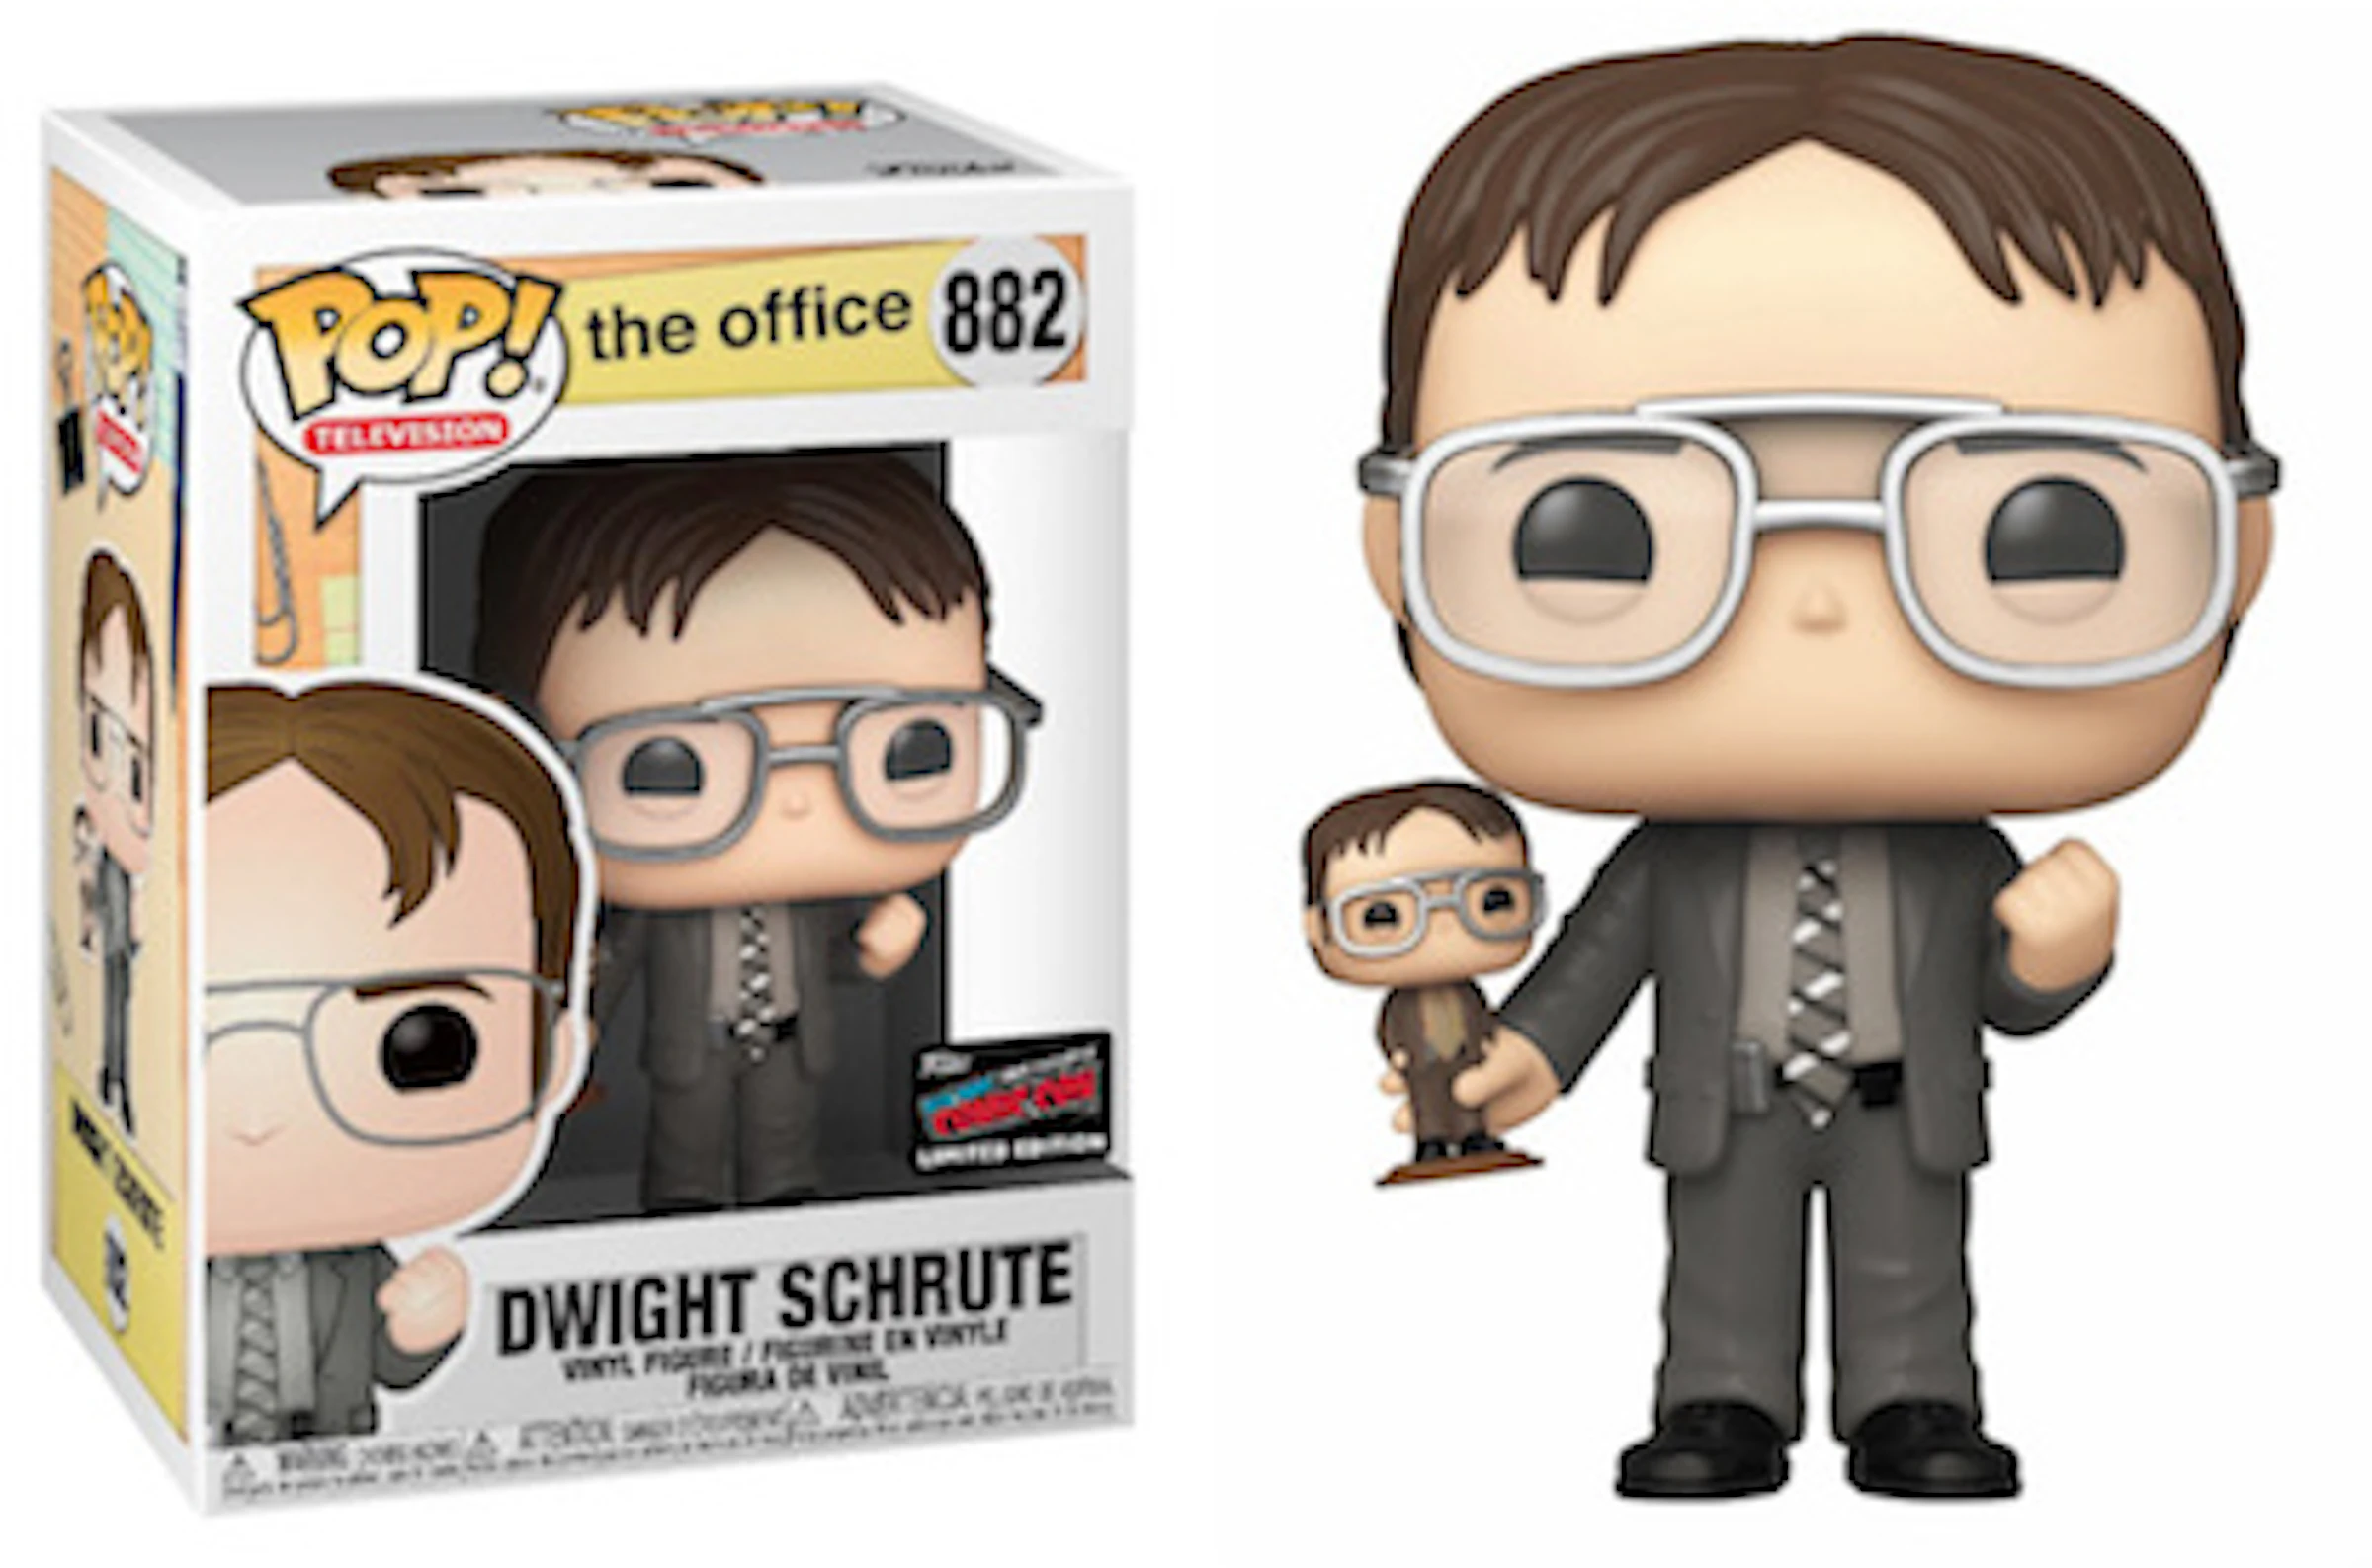 Funko Pop! Television The Office Dwight Schrute With Bobblehead 2019 NYCC  Exclusive Figure #882 - FW19 - US